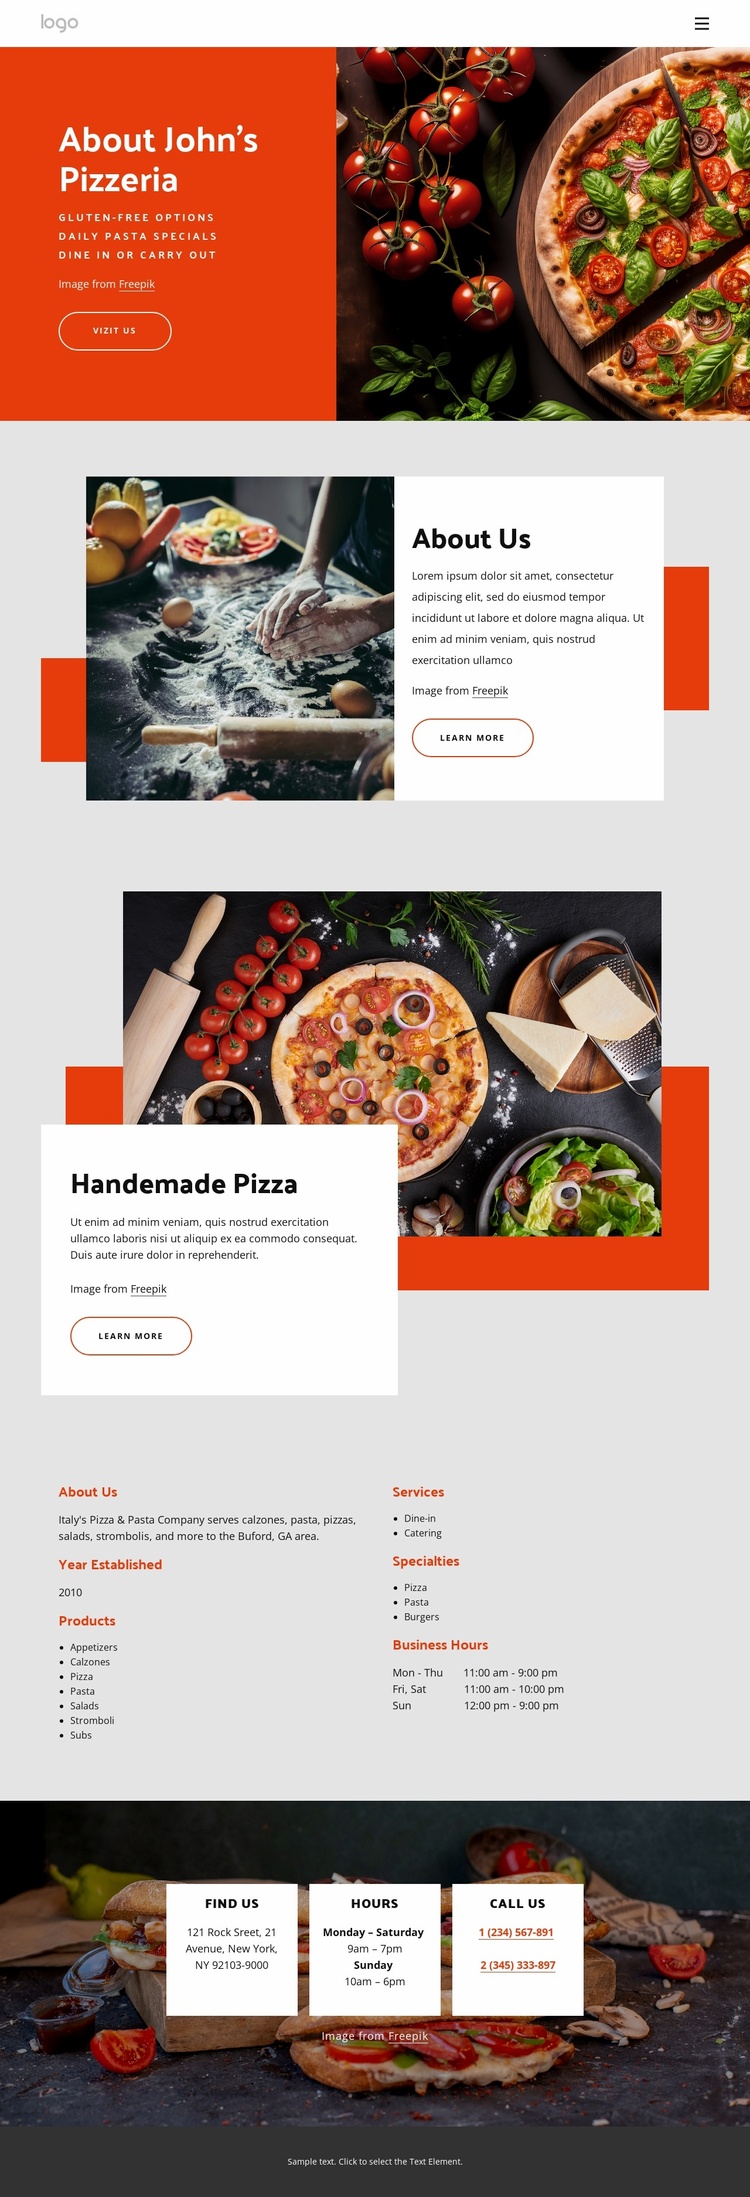 About our pizzeria Landing Page